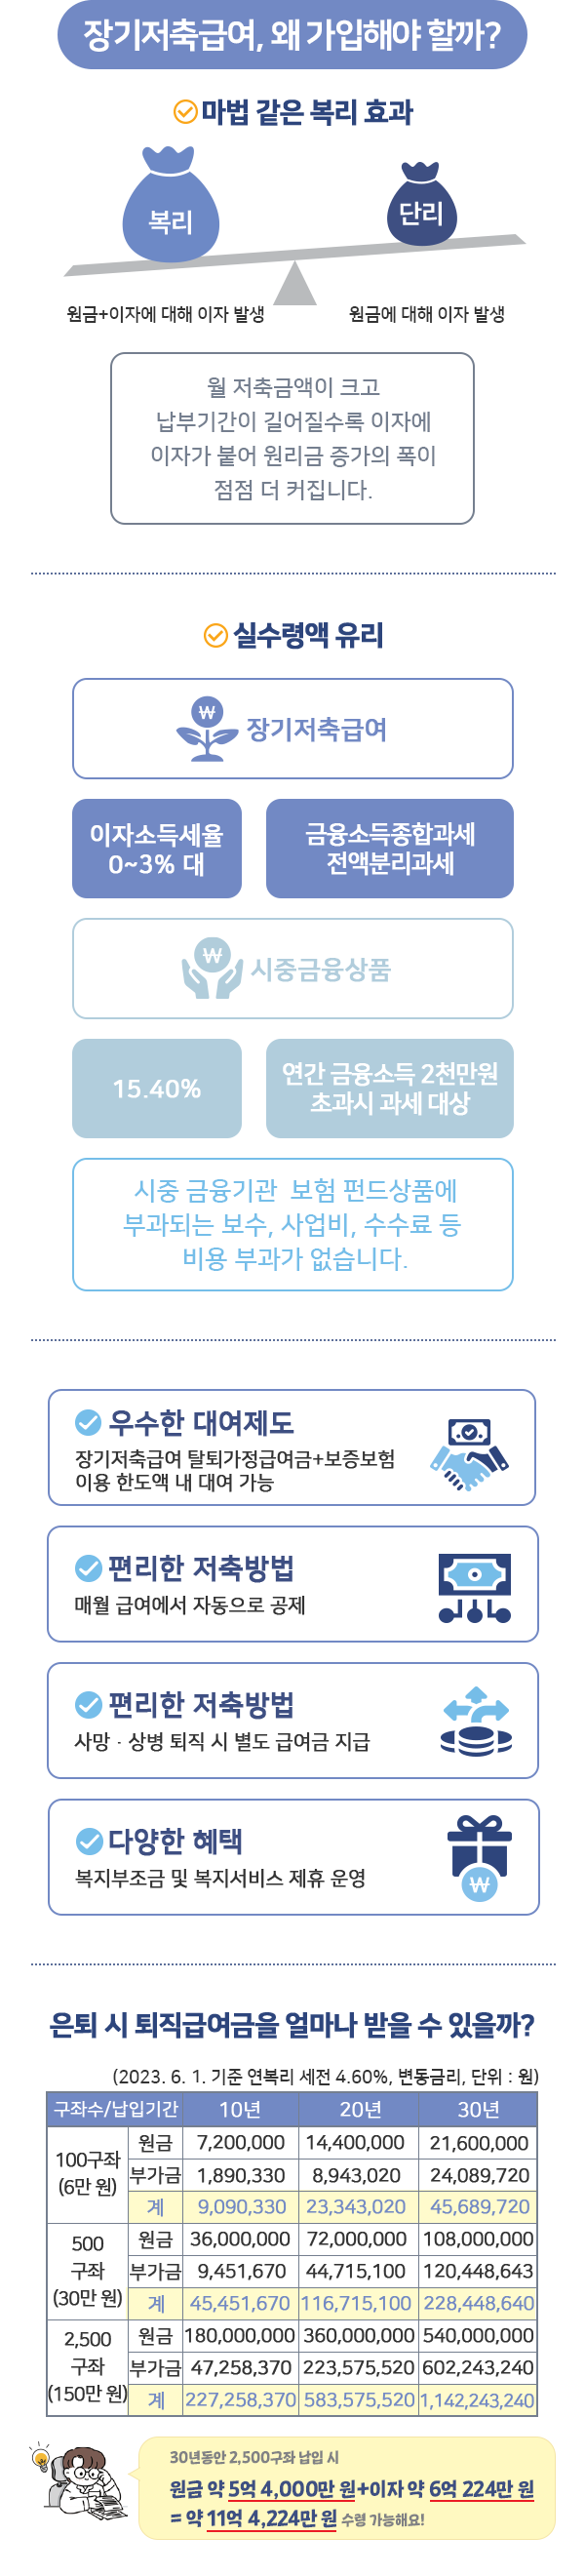 The-K 포커스 1_02